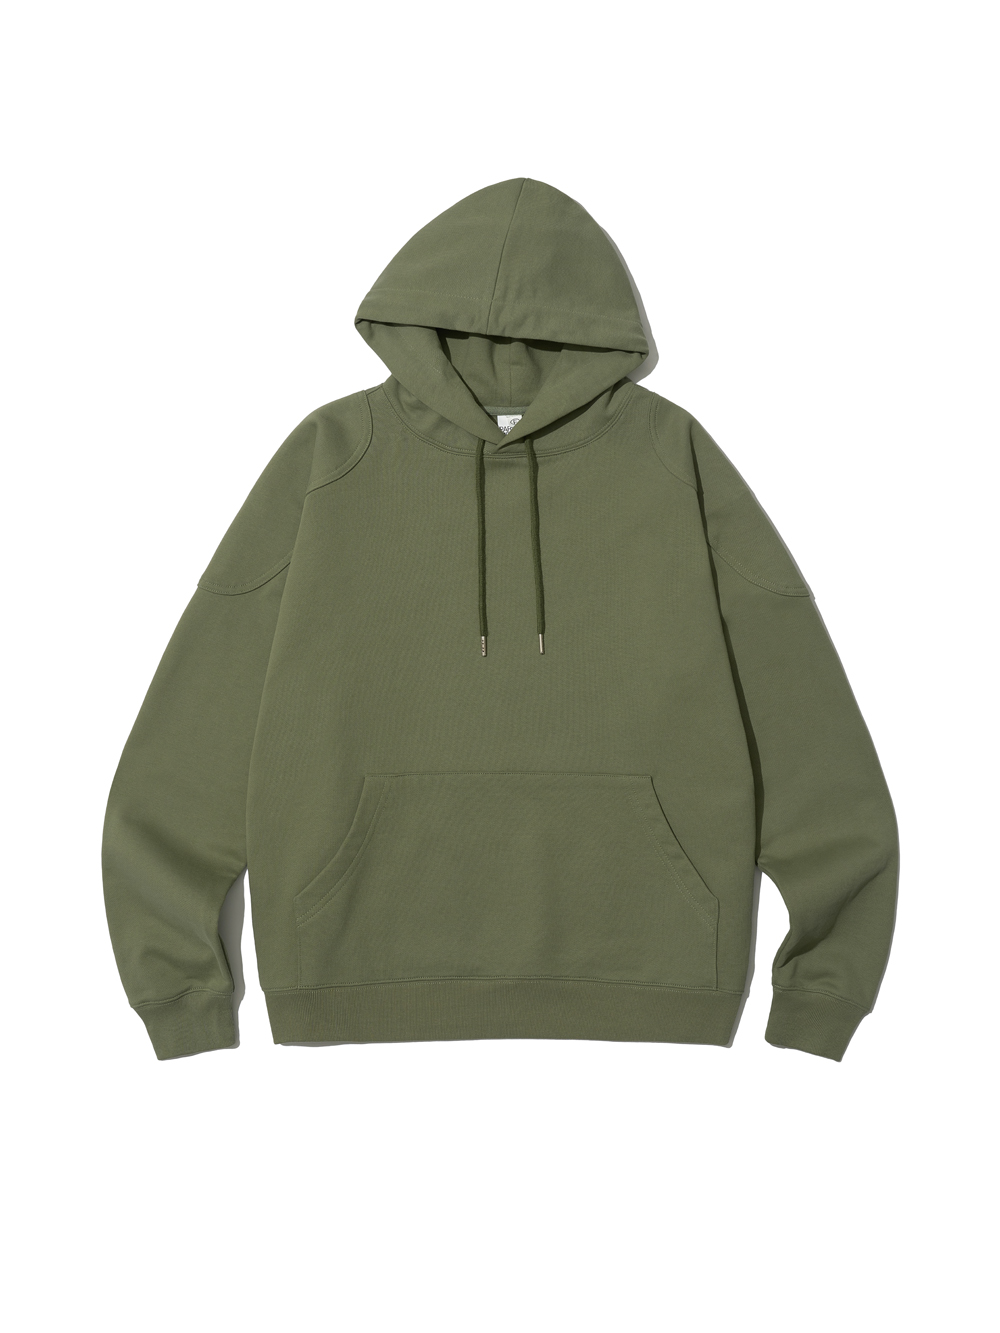 Partimento Riding Patch Hoodie